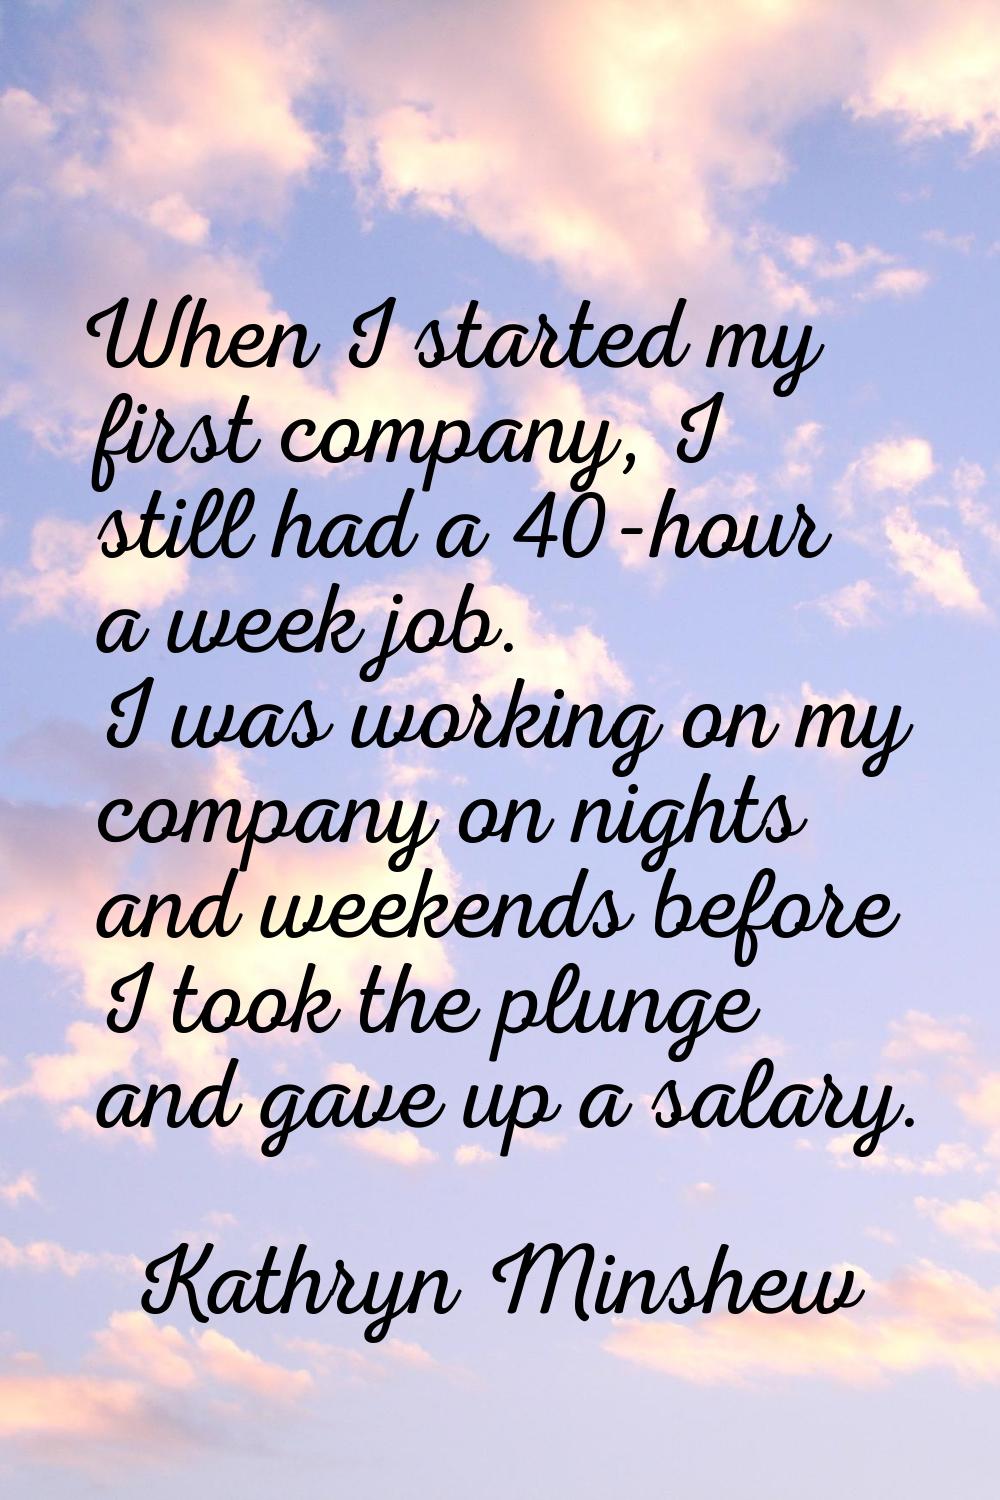 When I started my first company, I still had a 40-hour a week job. I was working on my company on n